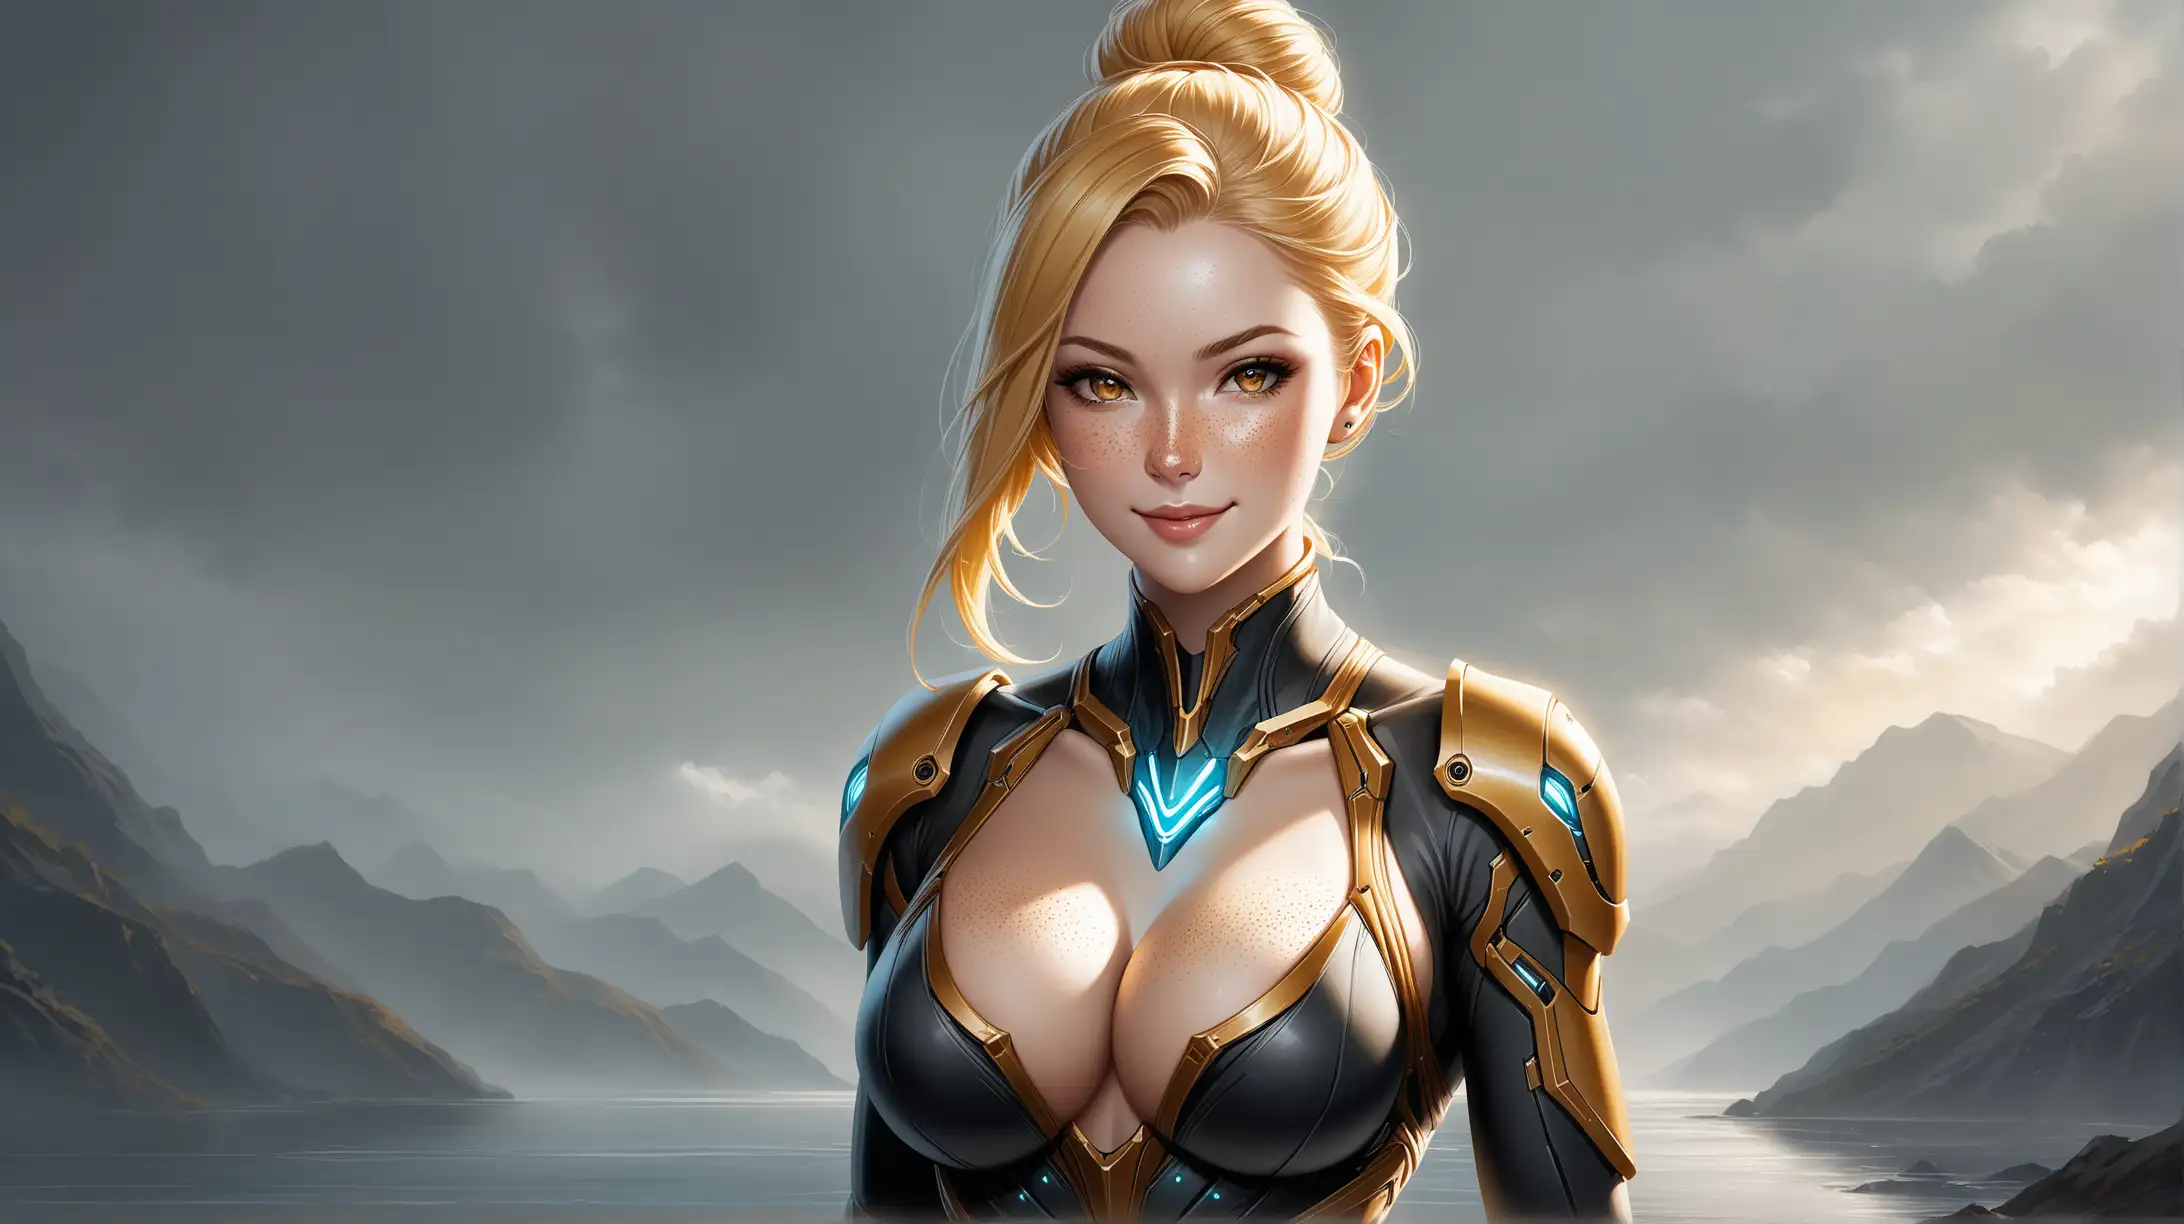 Seductive Blonde Woman in Warframeinspired Outfit Smiling Outdoors